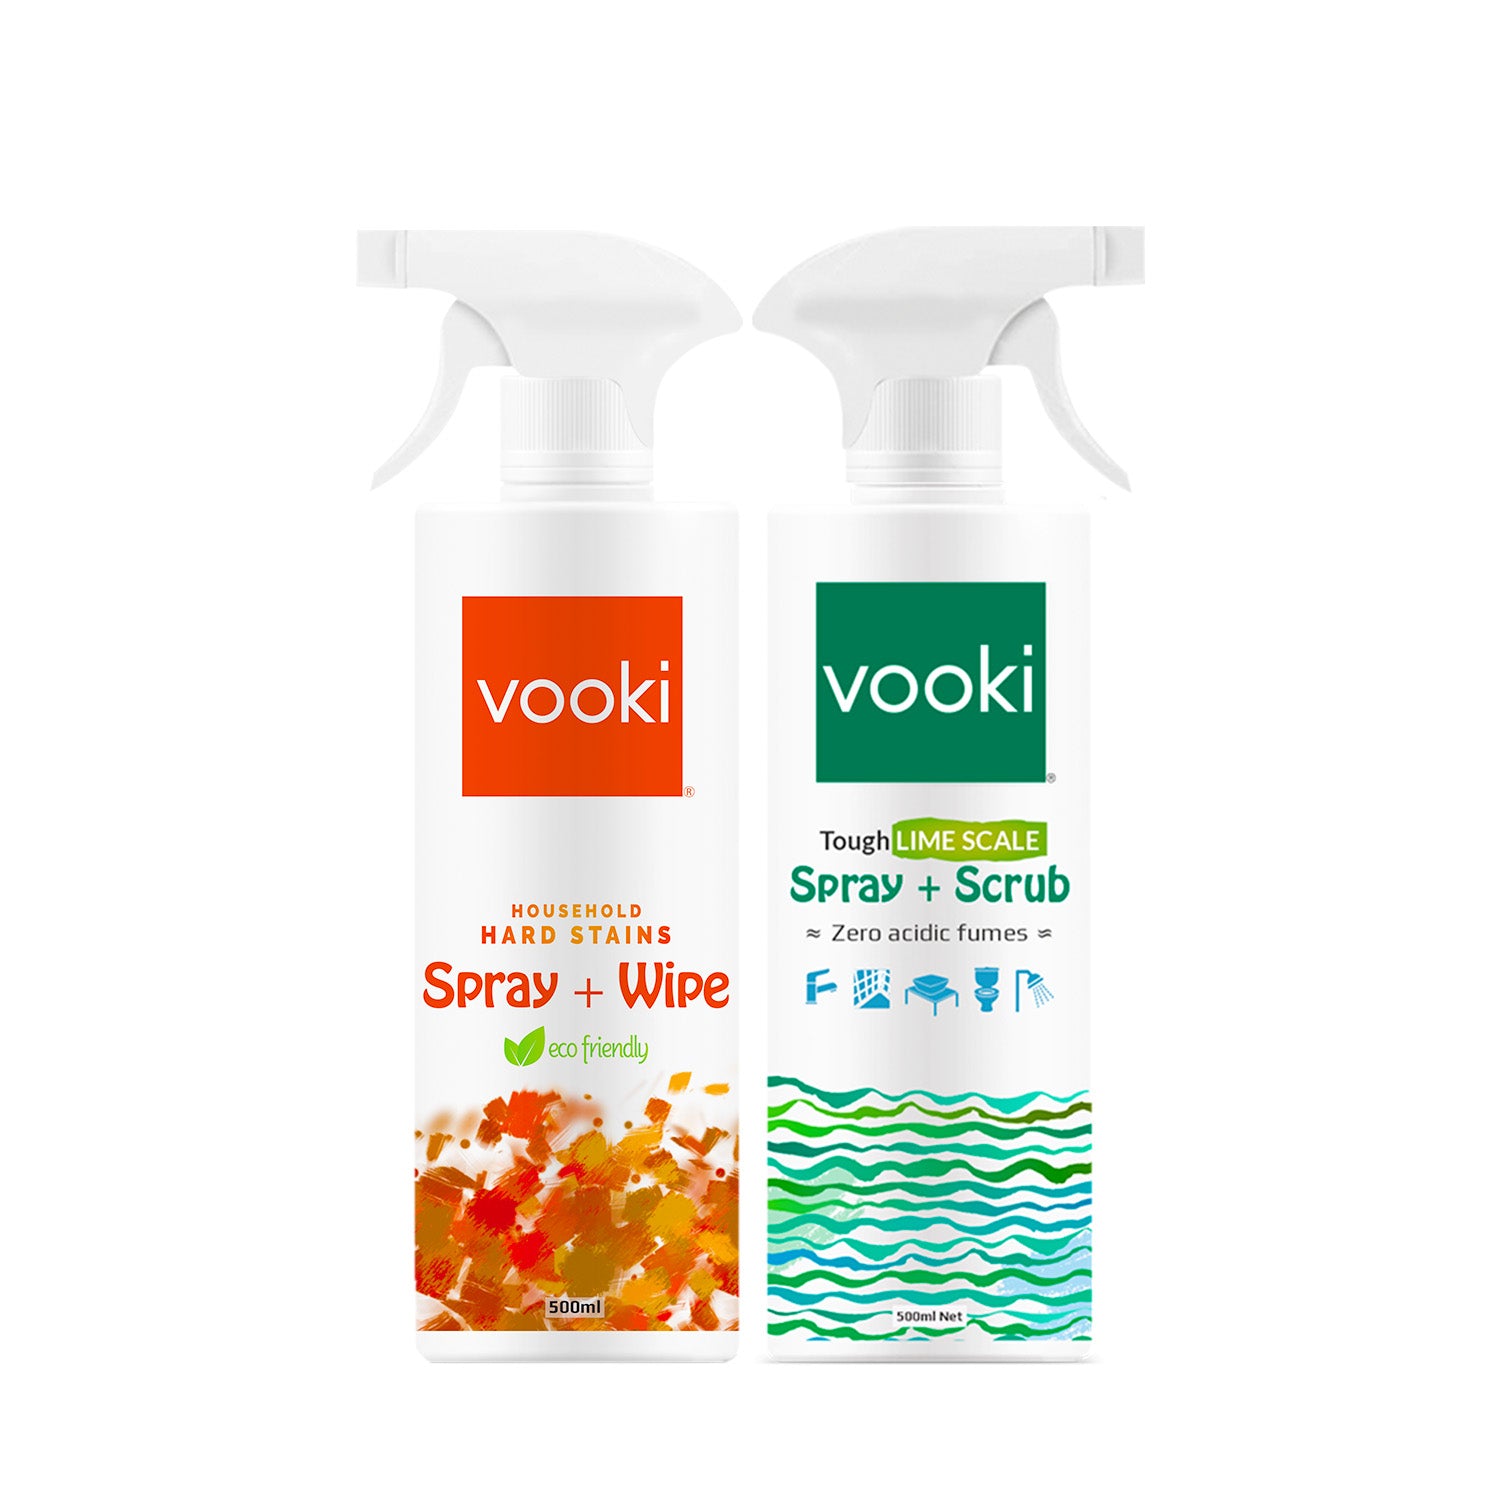 vooki spray and wipe cleaning products-the best cleaning solution and easy to use with a effective cleaning on a white background.